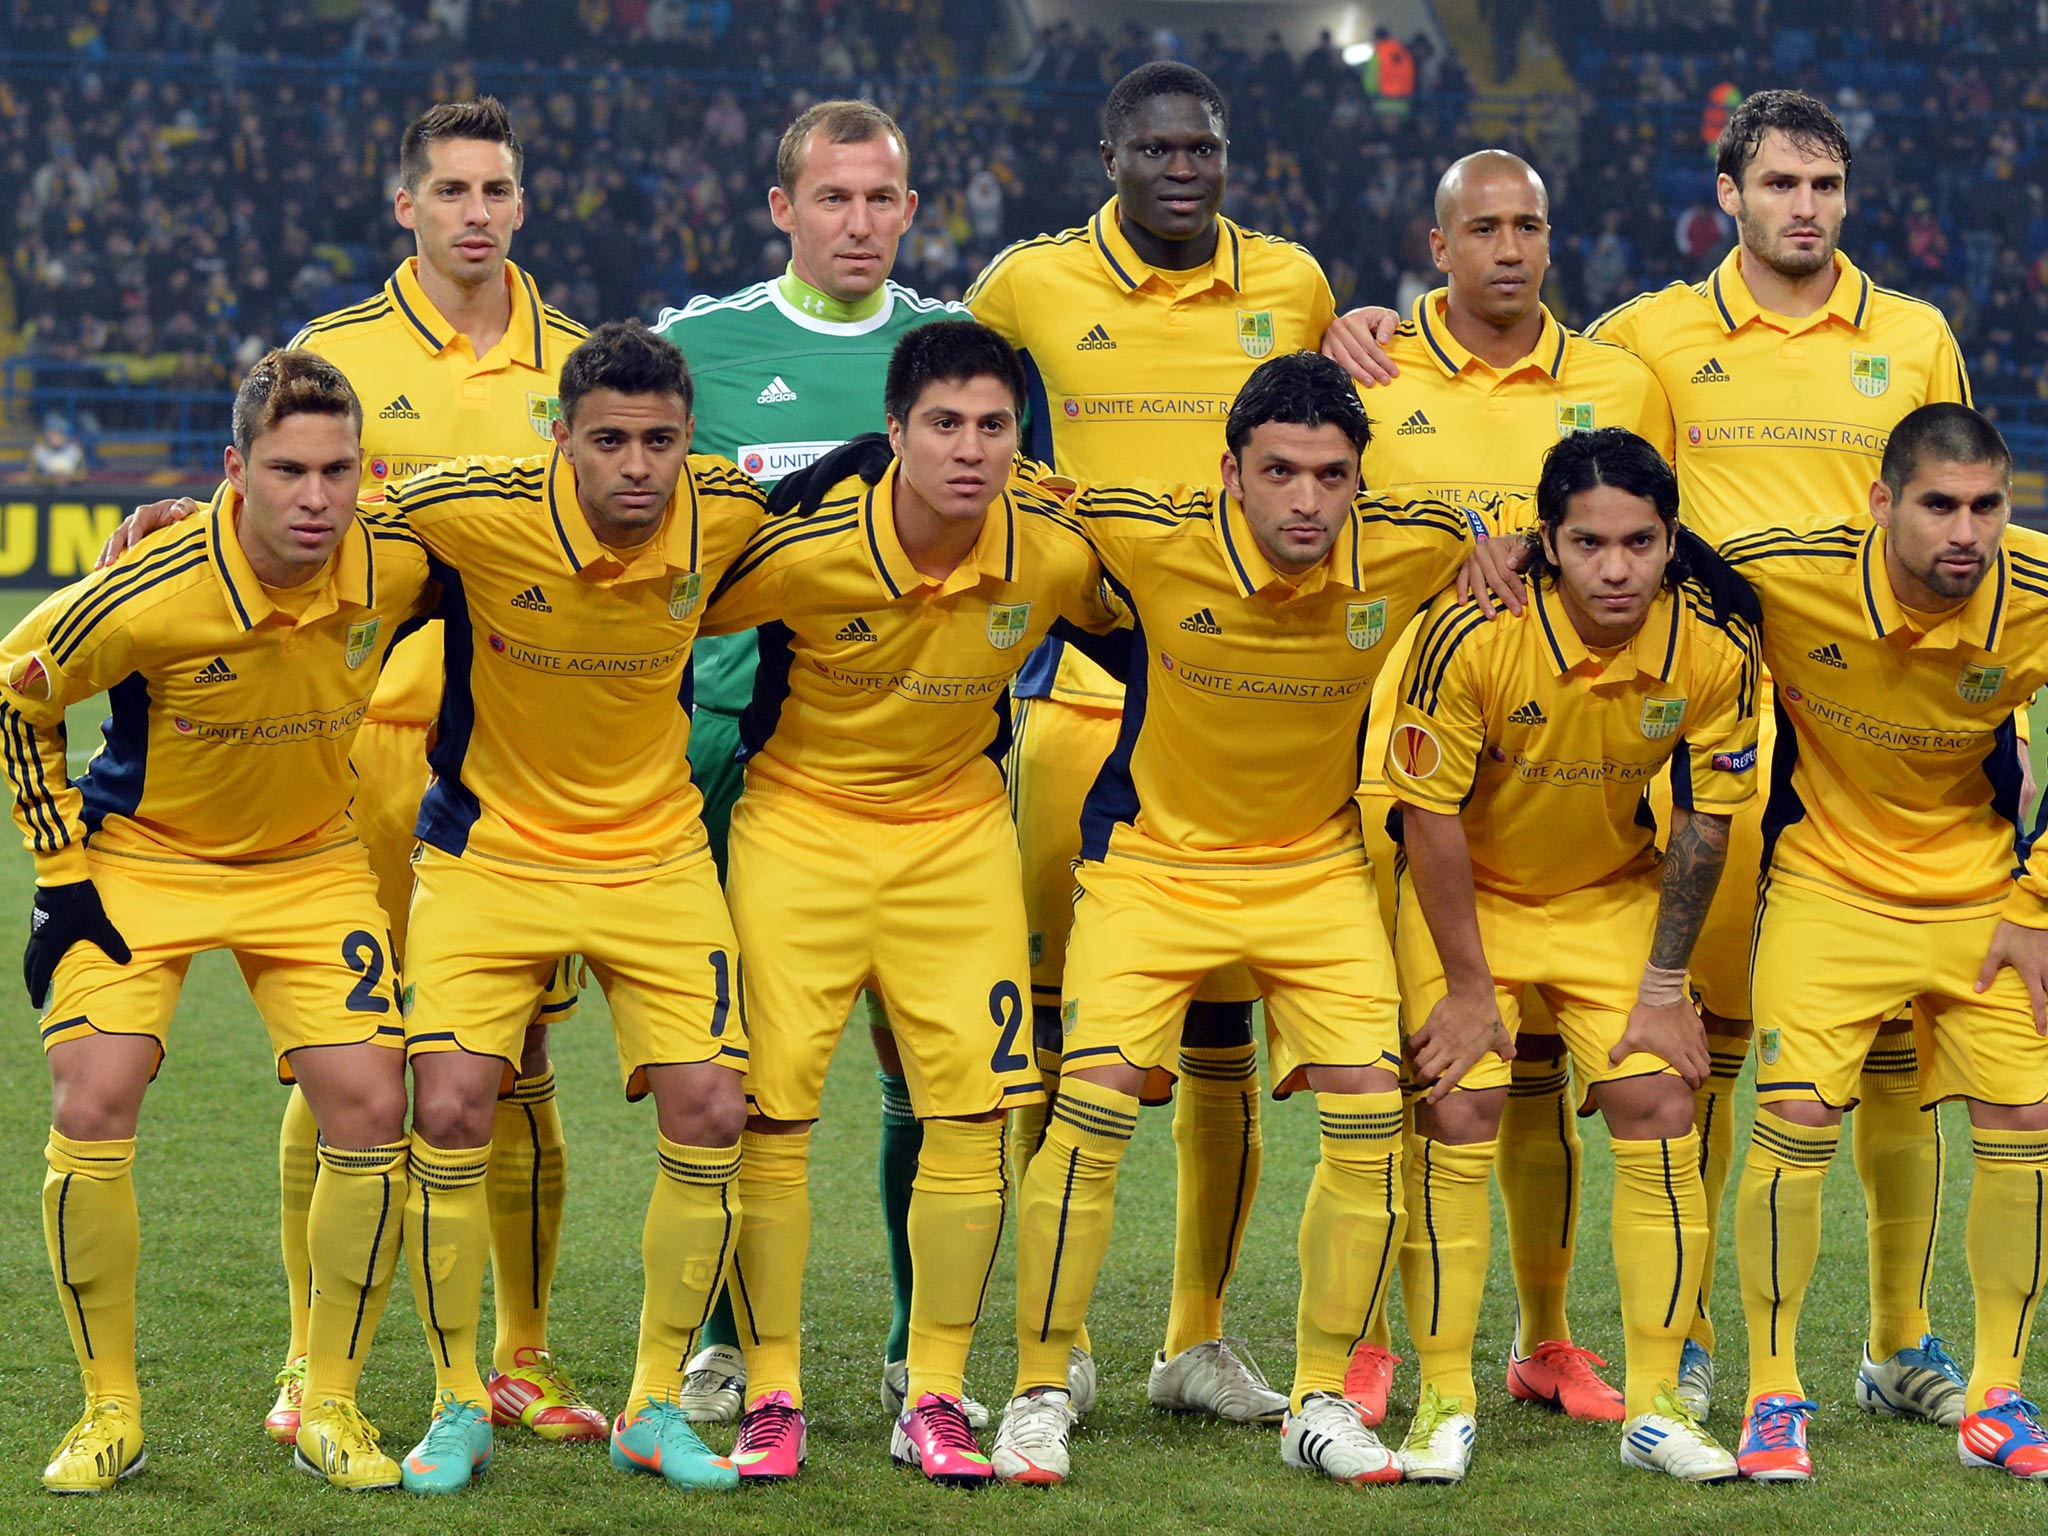 Metalist Kharkiv pictured ahead of playing Newcastle in the Europa League last season